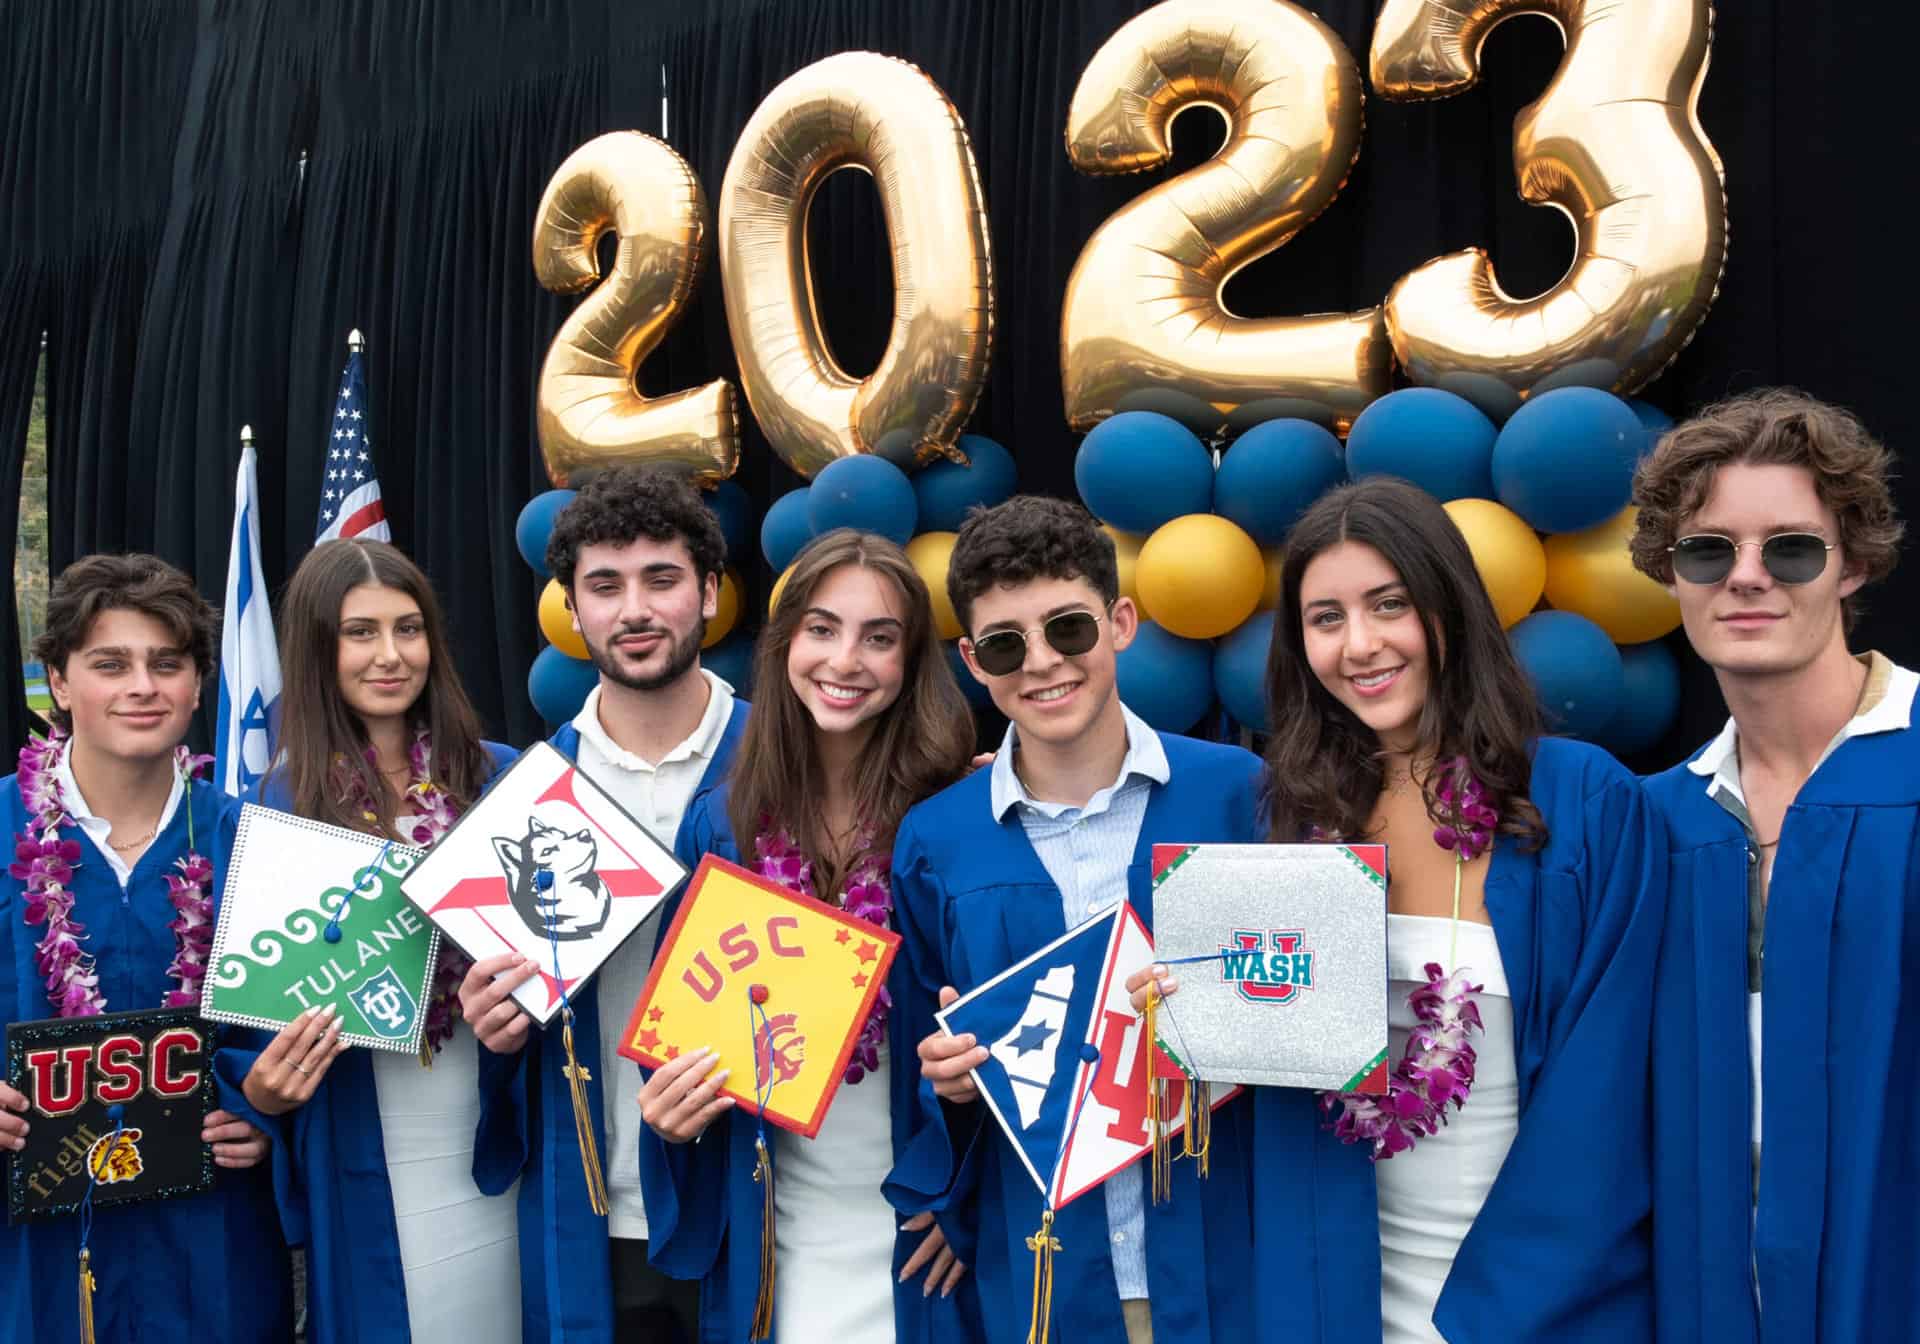 Upper school students pose on graduation stage with their caps